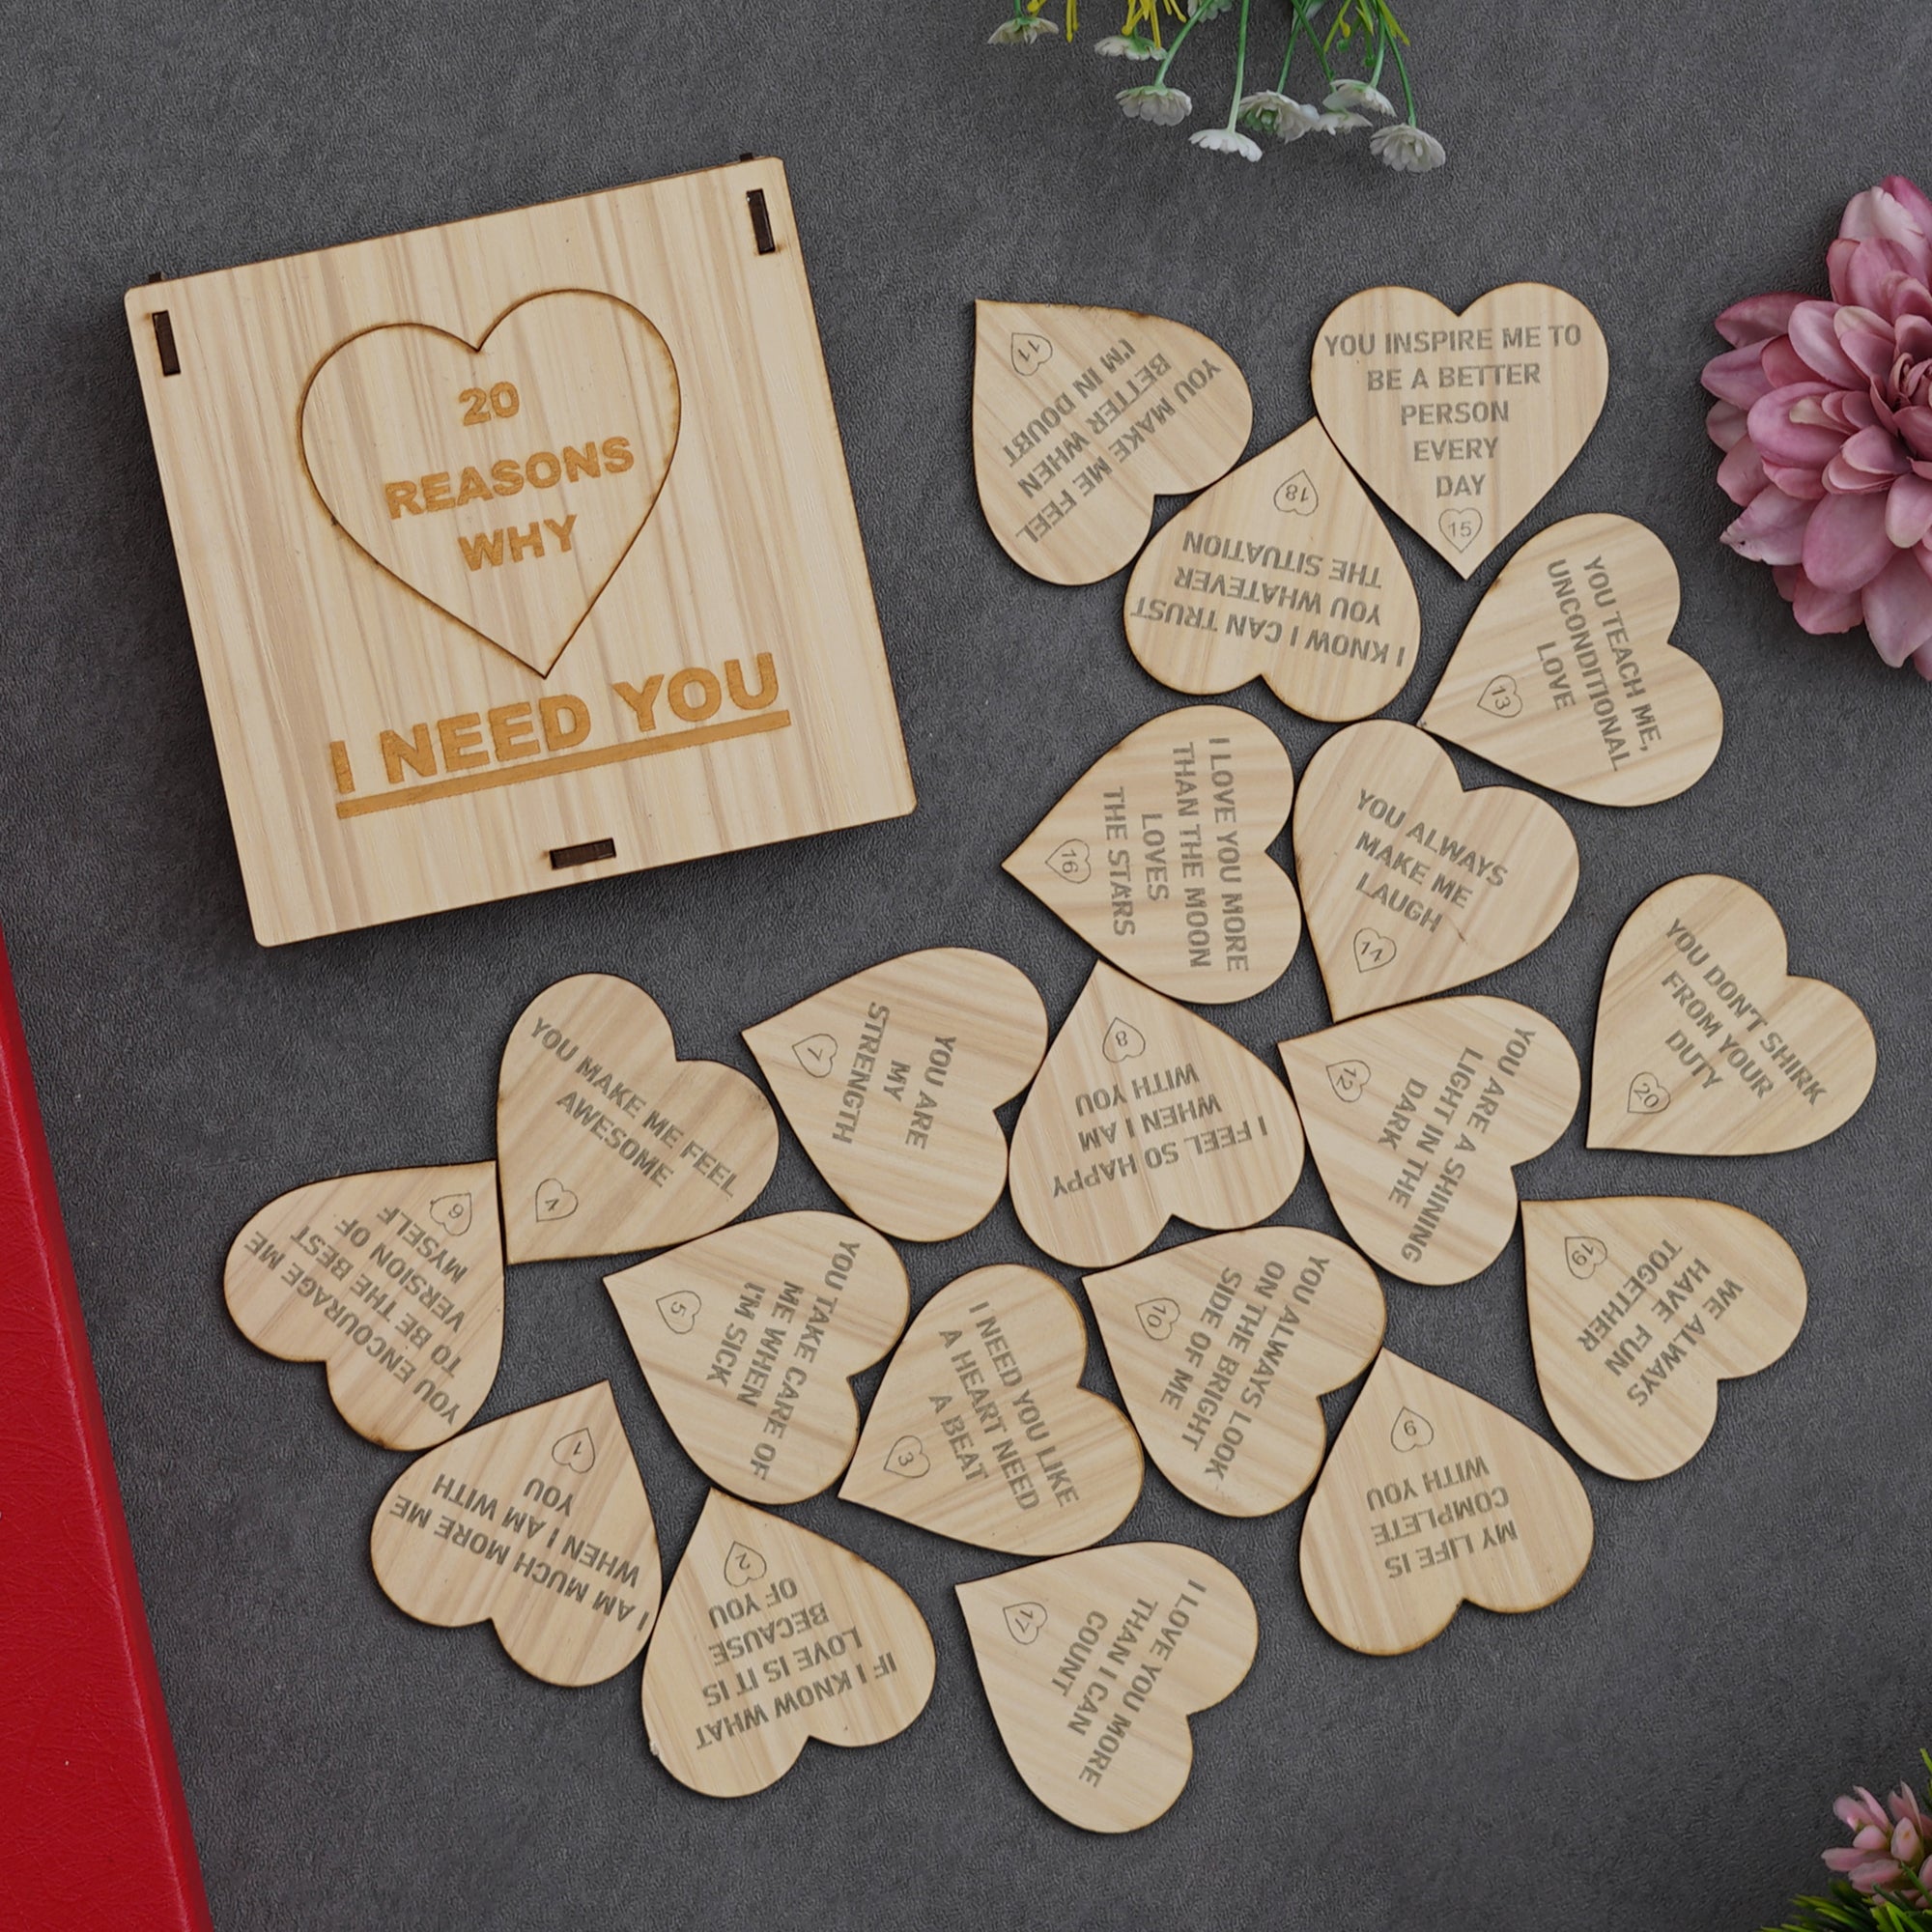 Valentine Combo of Pack of 8 Love Gift Cards, Red Gift Box with Teddy & Roses, "20 Reasons Why I Need You" Printed on Little Hearts Wooden Gift Set 5